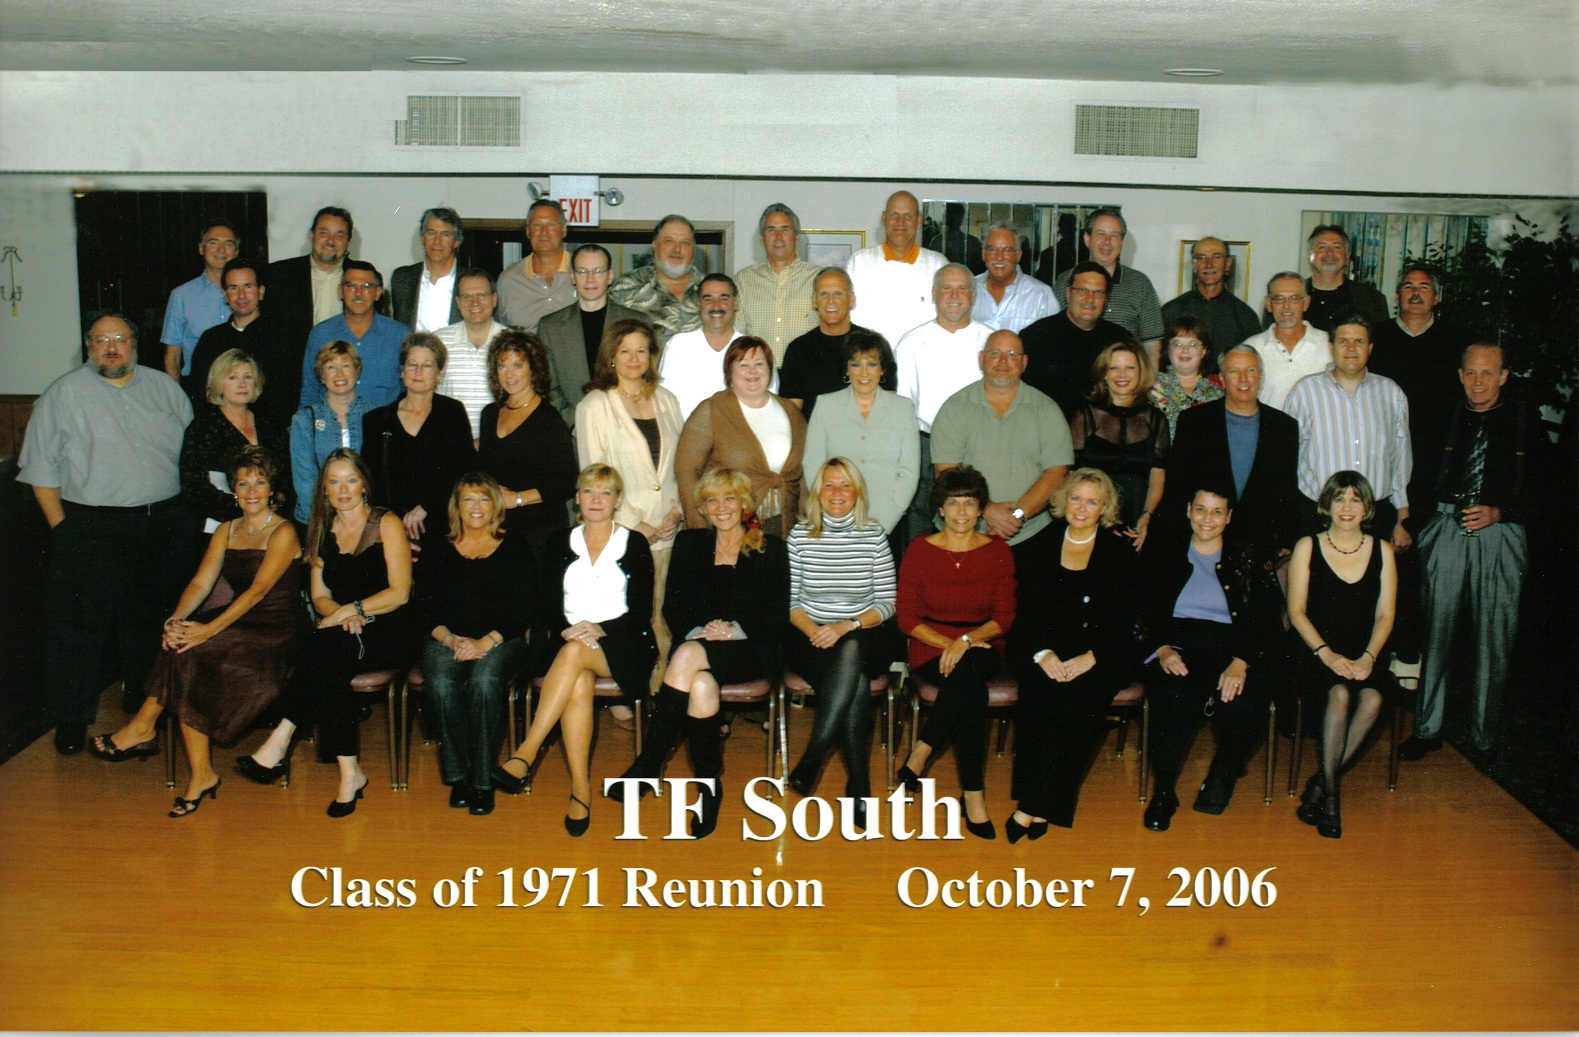 This is the 35 Year Reunion for the Class of 1971 from TFS